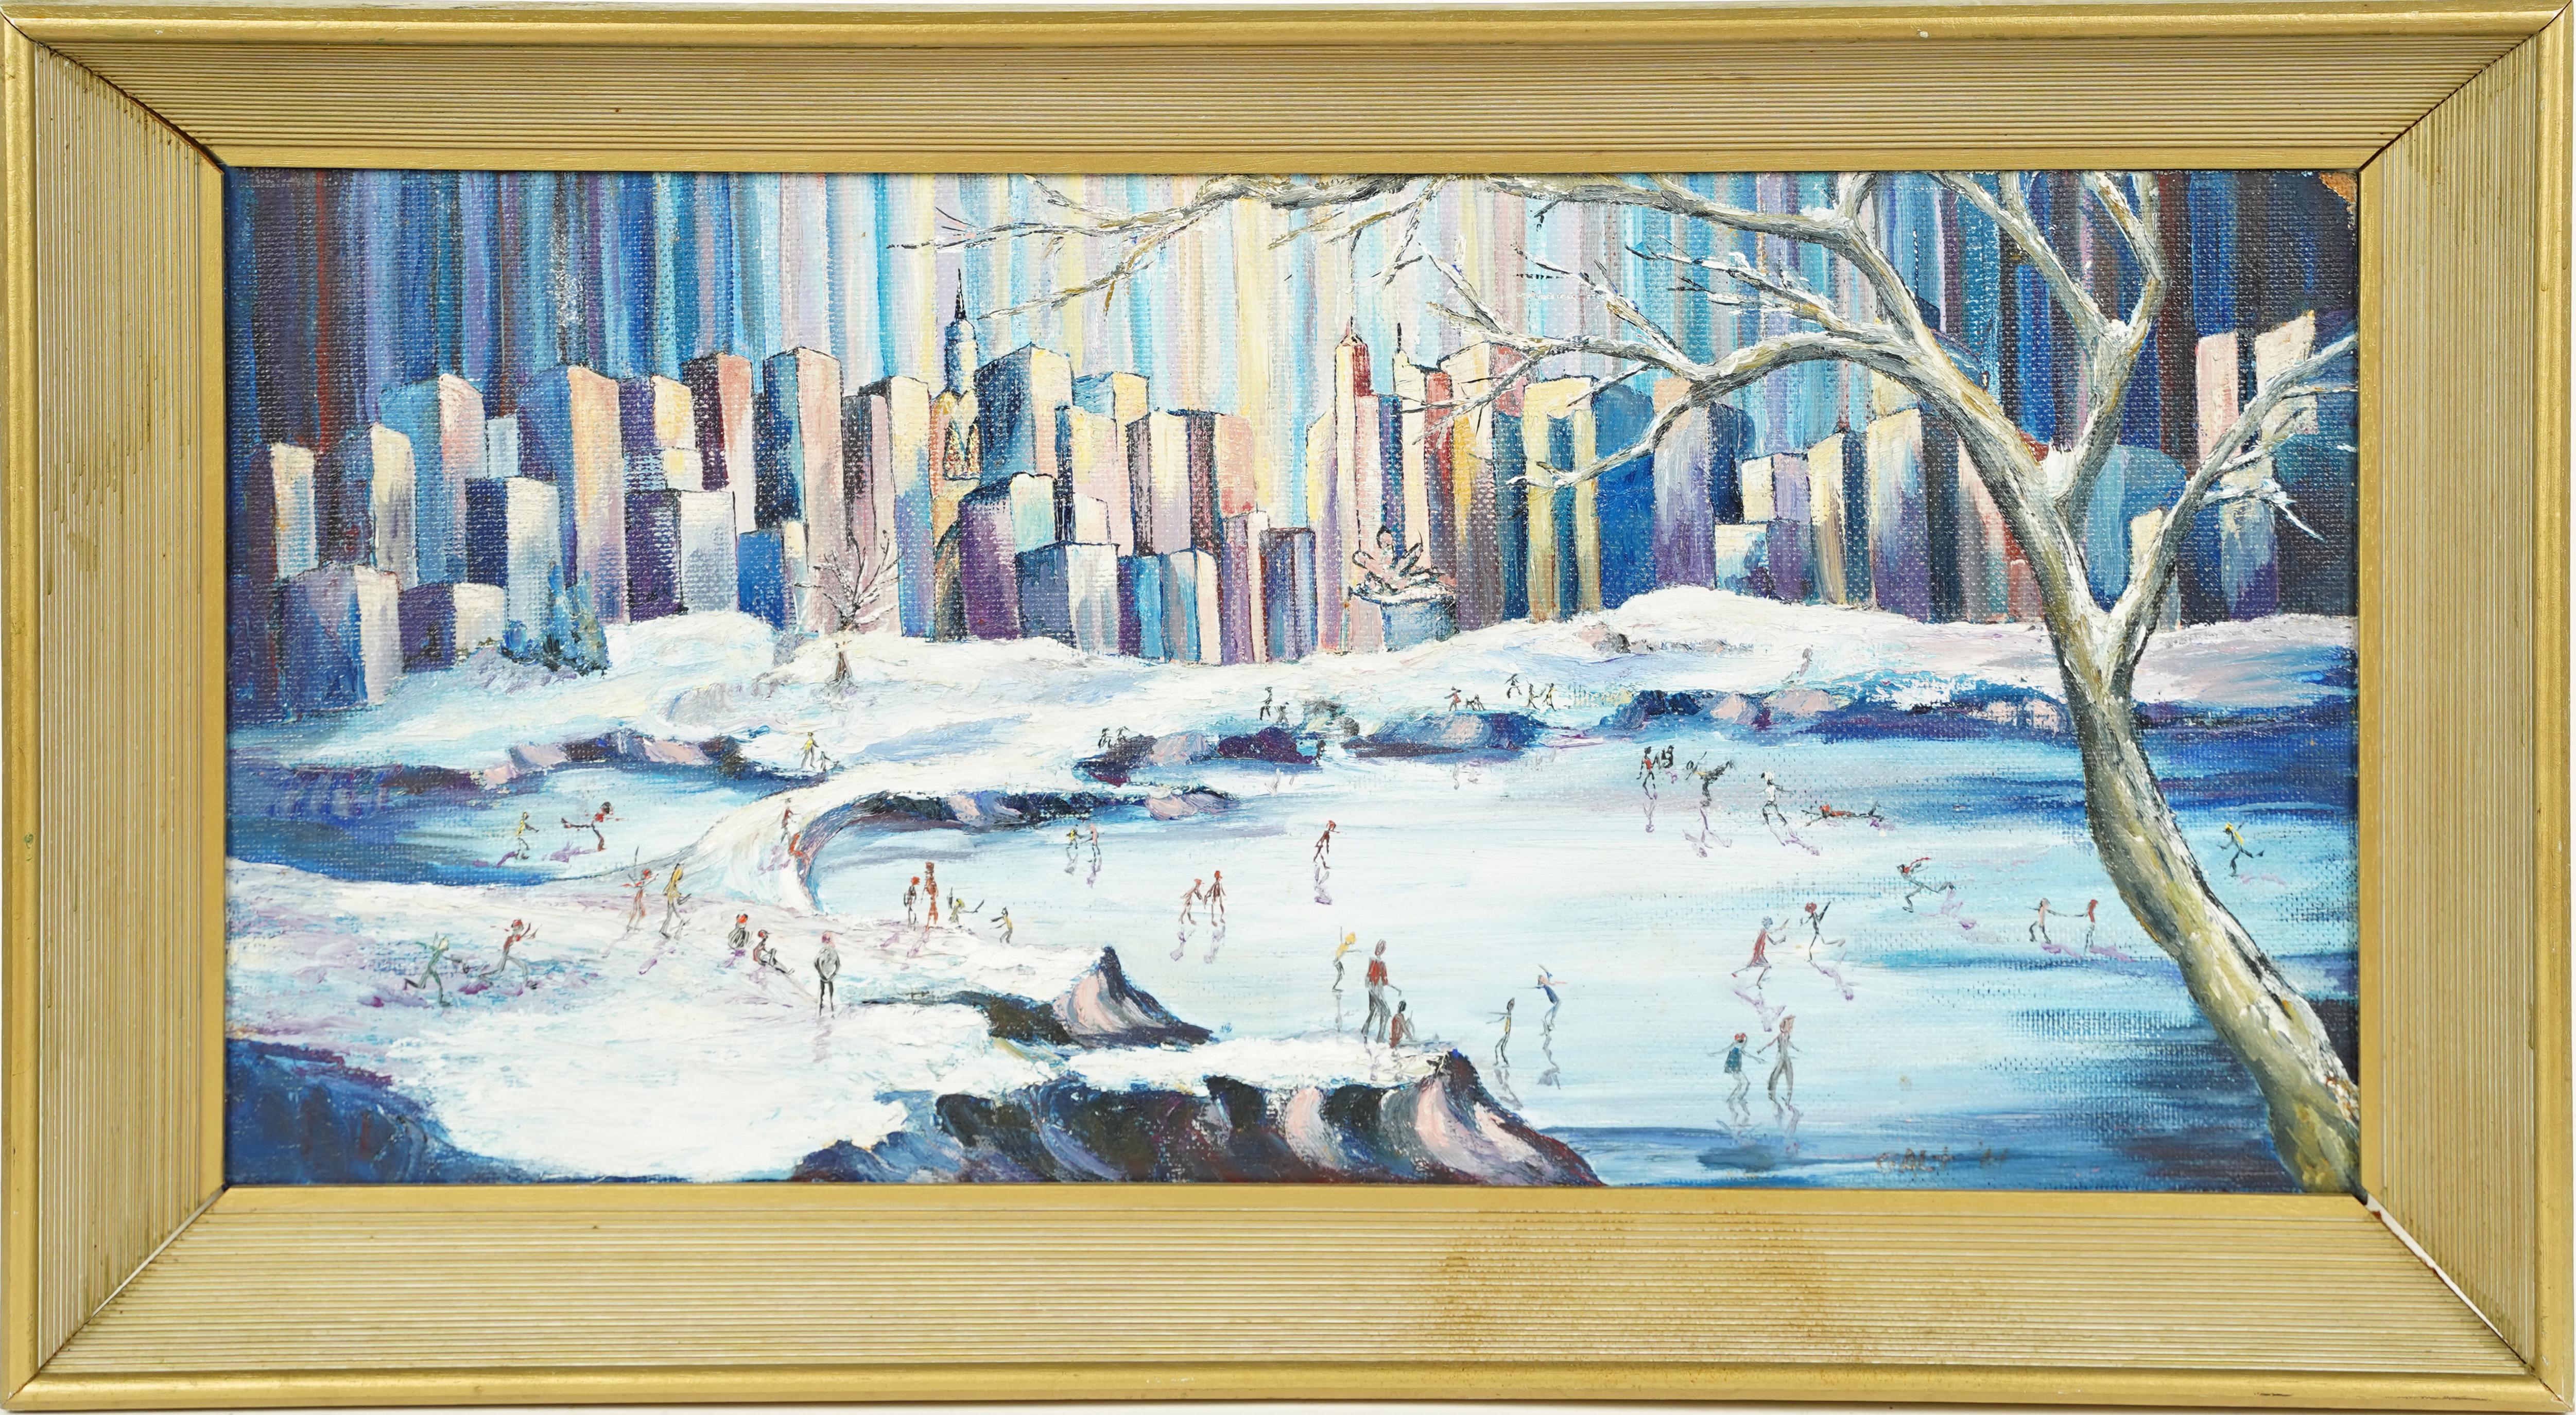 Vintage mid century modern oil painting of skaters in central park.  Oil on board. Framed.  Signed.  Image size, 24L x 12H.